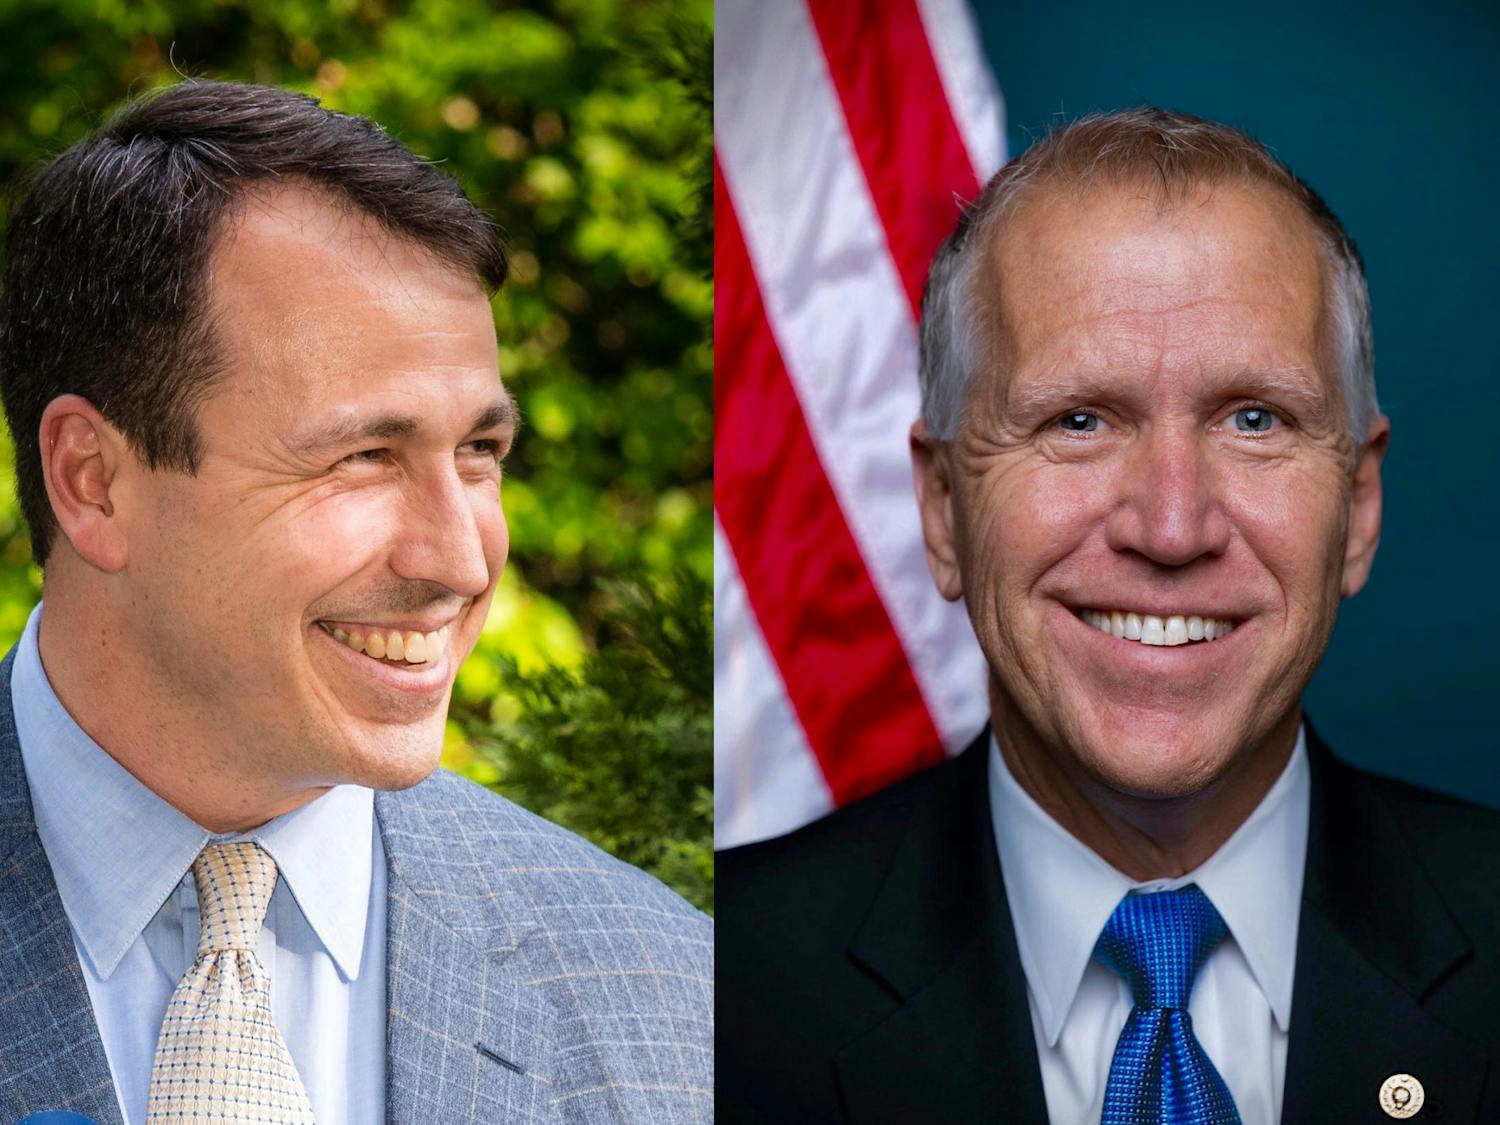 Cal Cunningham (left) and Thom Tillis (right) are candidates for state senator. Photos courtesy of Cunningham and Tillis.